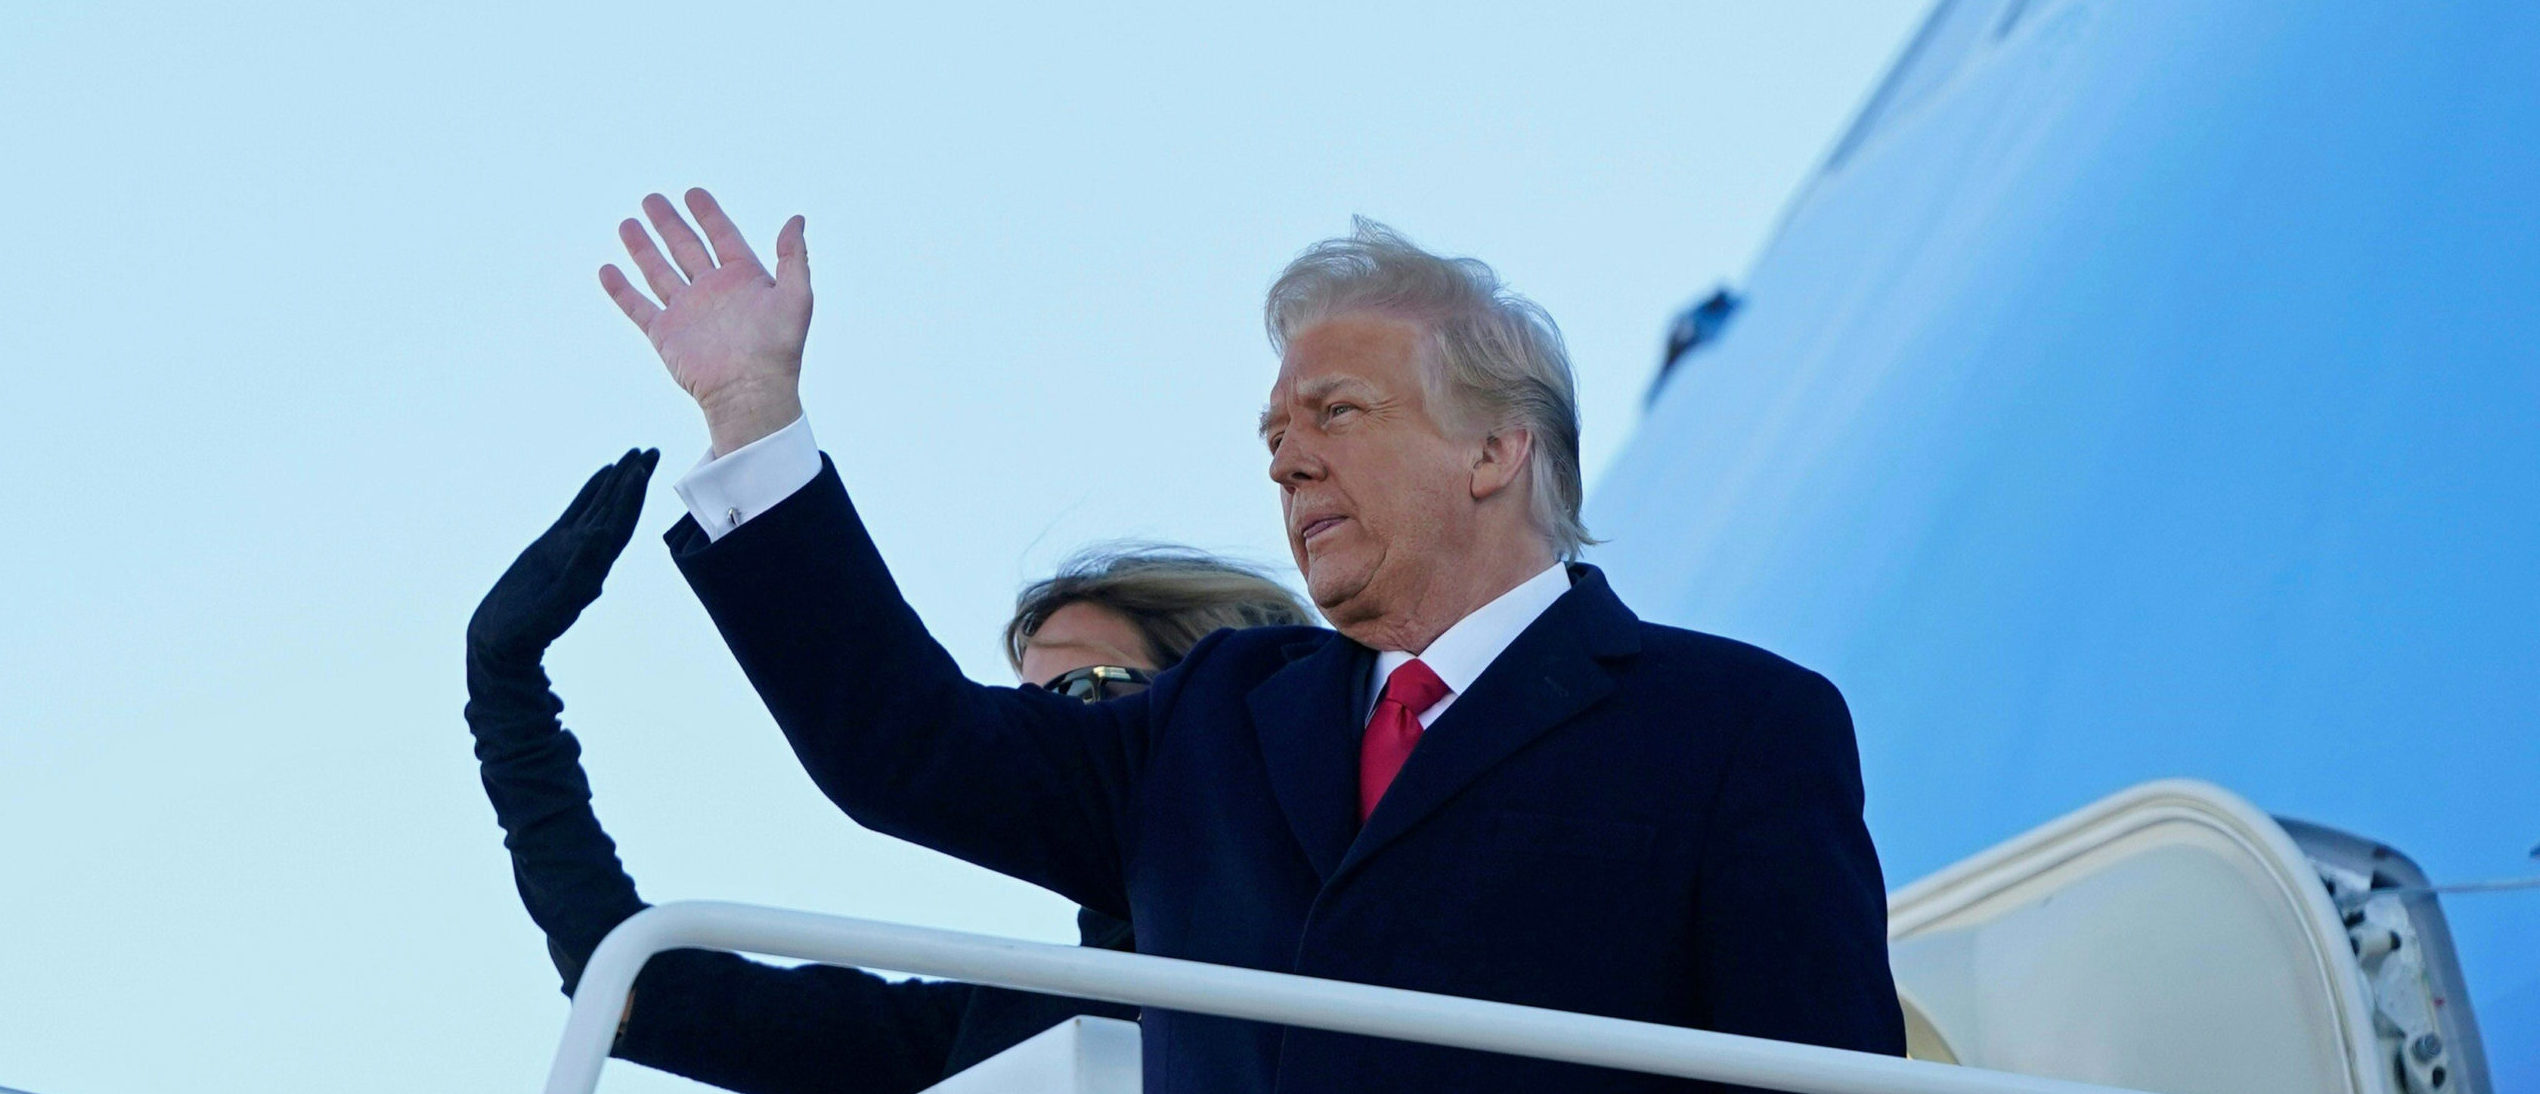 US President Donald Trump and First Lady Melania Trump wave as they board Air Force One at Joint Base Andrews in Maryland on January 20, 2021. - President Trump and the First Lady travel to his Mar-a-Lago golf club residence in Palm Beach, Florida, and will not attend the inauguration for President-elect Joe Biden. (Photo by ALEX EDELMAN / AFP) (Photo by ALEX EDELMAN/AFP via Getty Images)